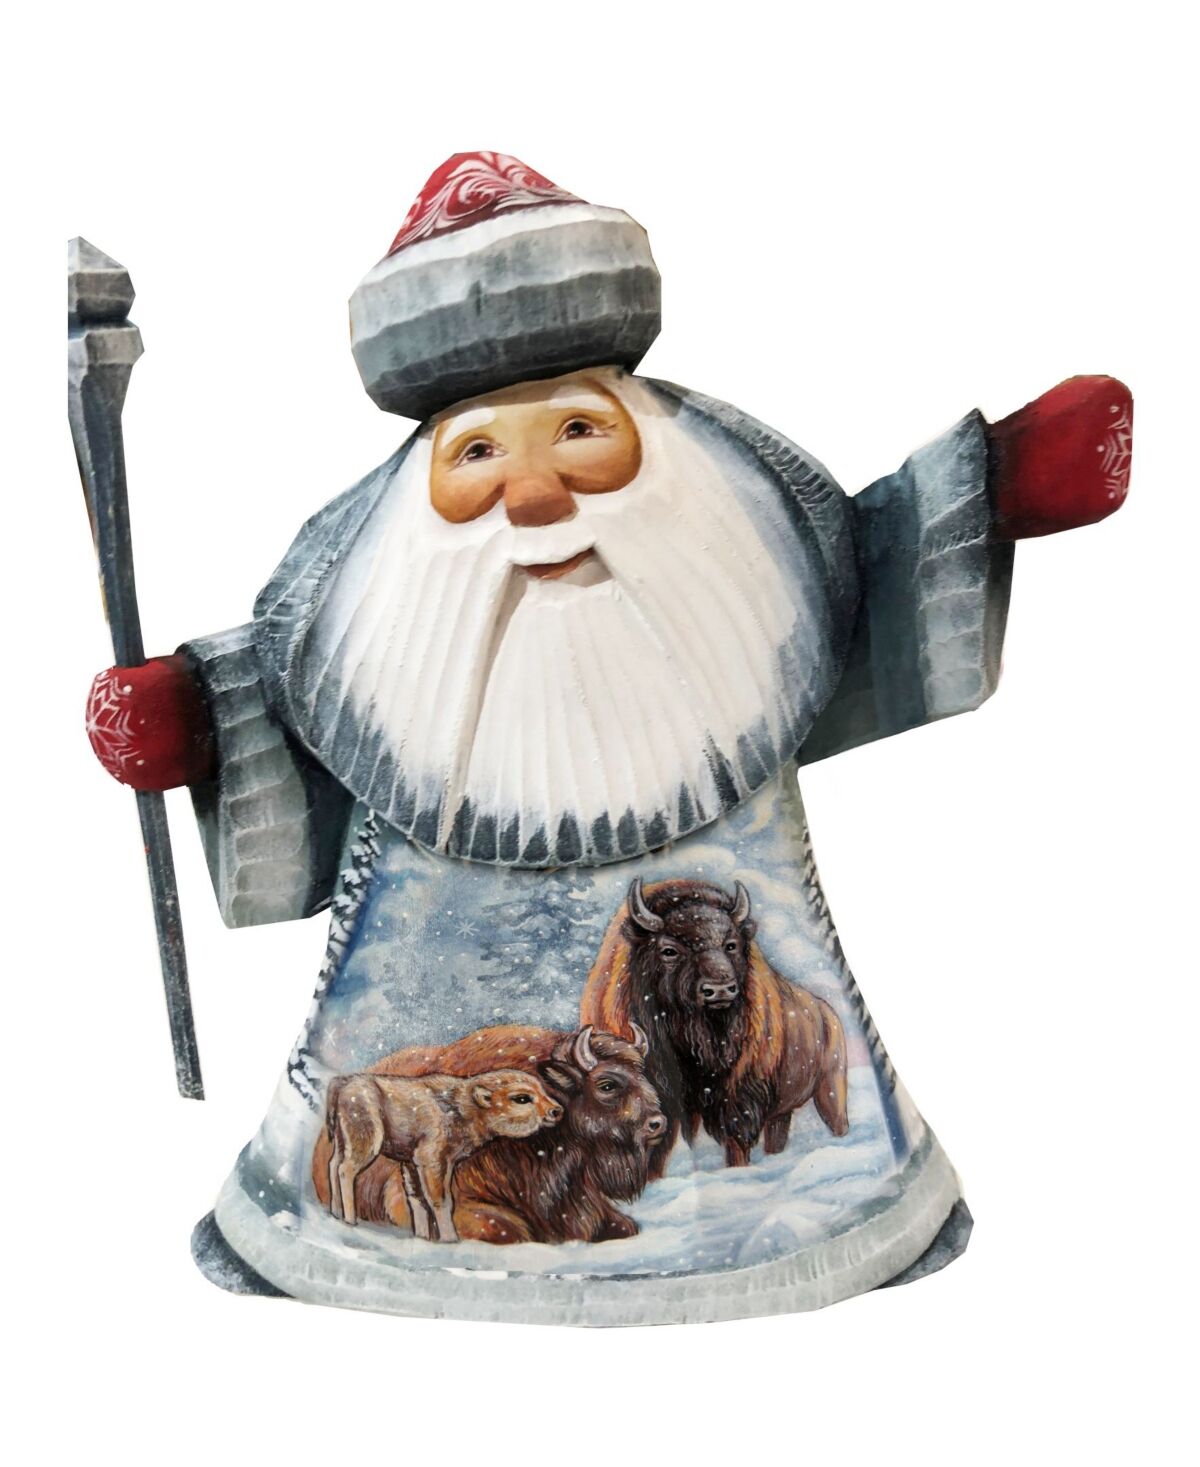 G.DeBrekht Woodcarved and Hand Painted Santa Buffalo Father Frost Santa Figurine - Multi